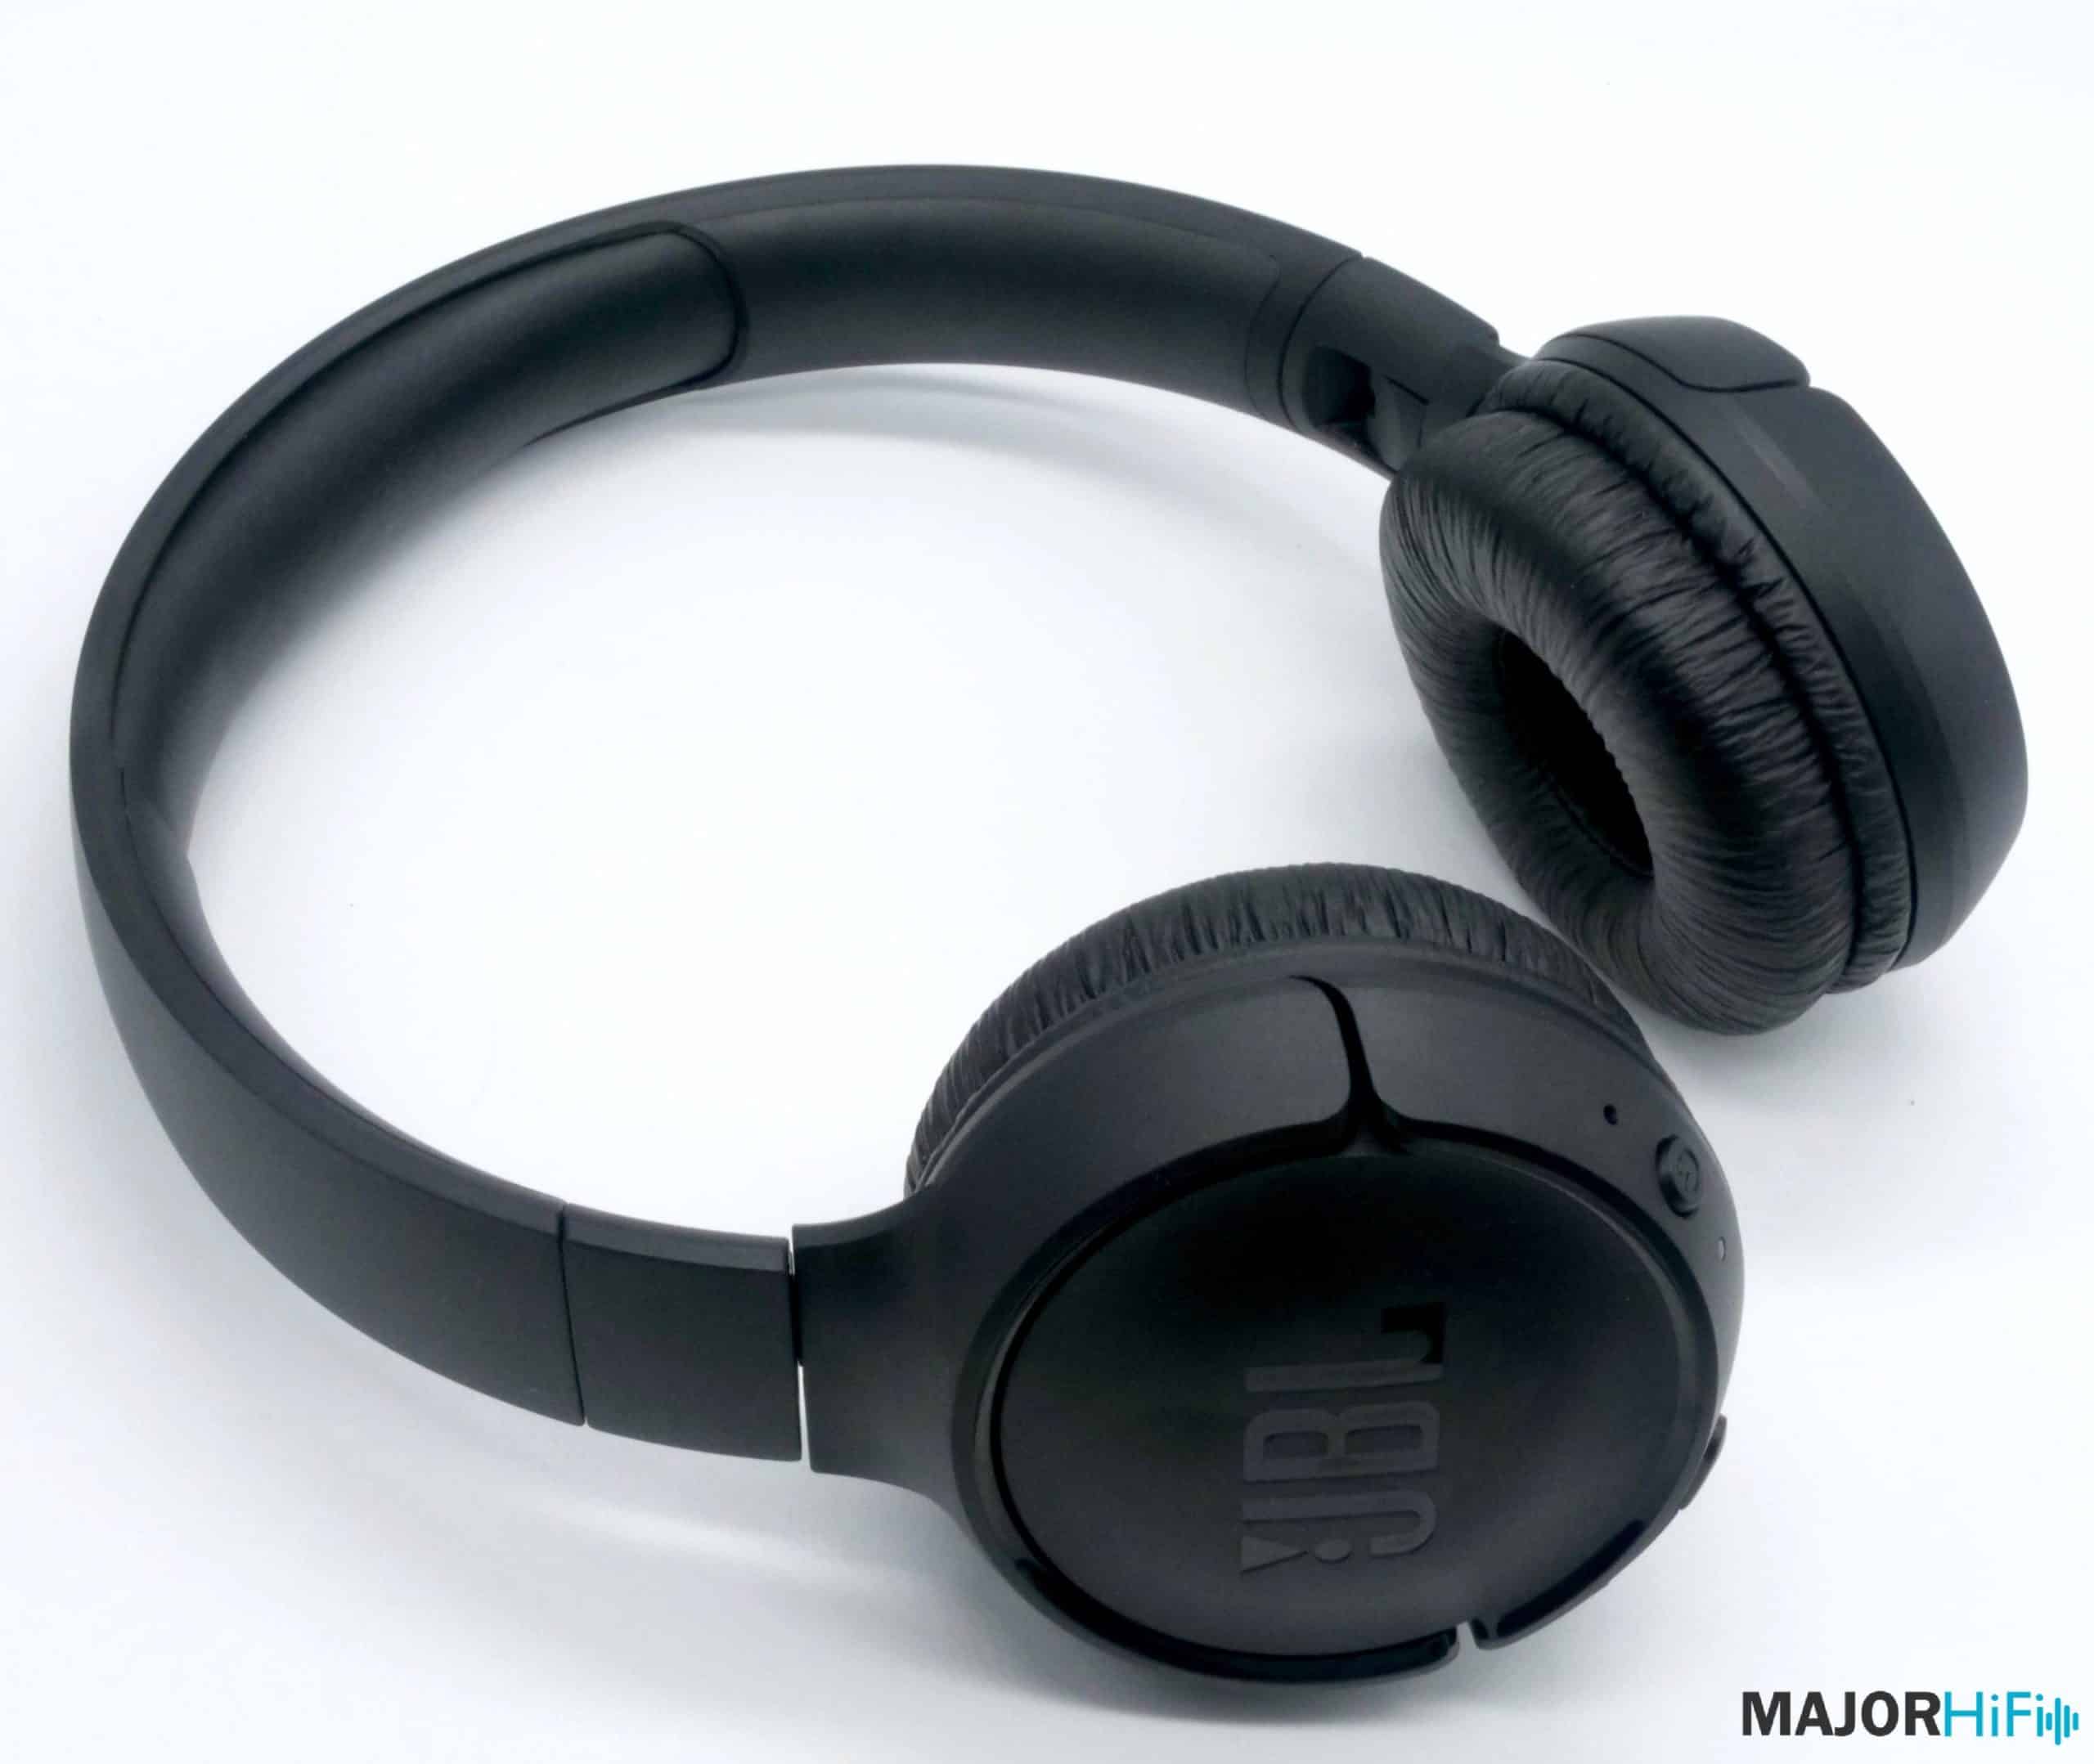 JBL 510BT Headphones - Only Review You Need to Read Major HiFi